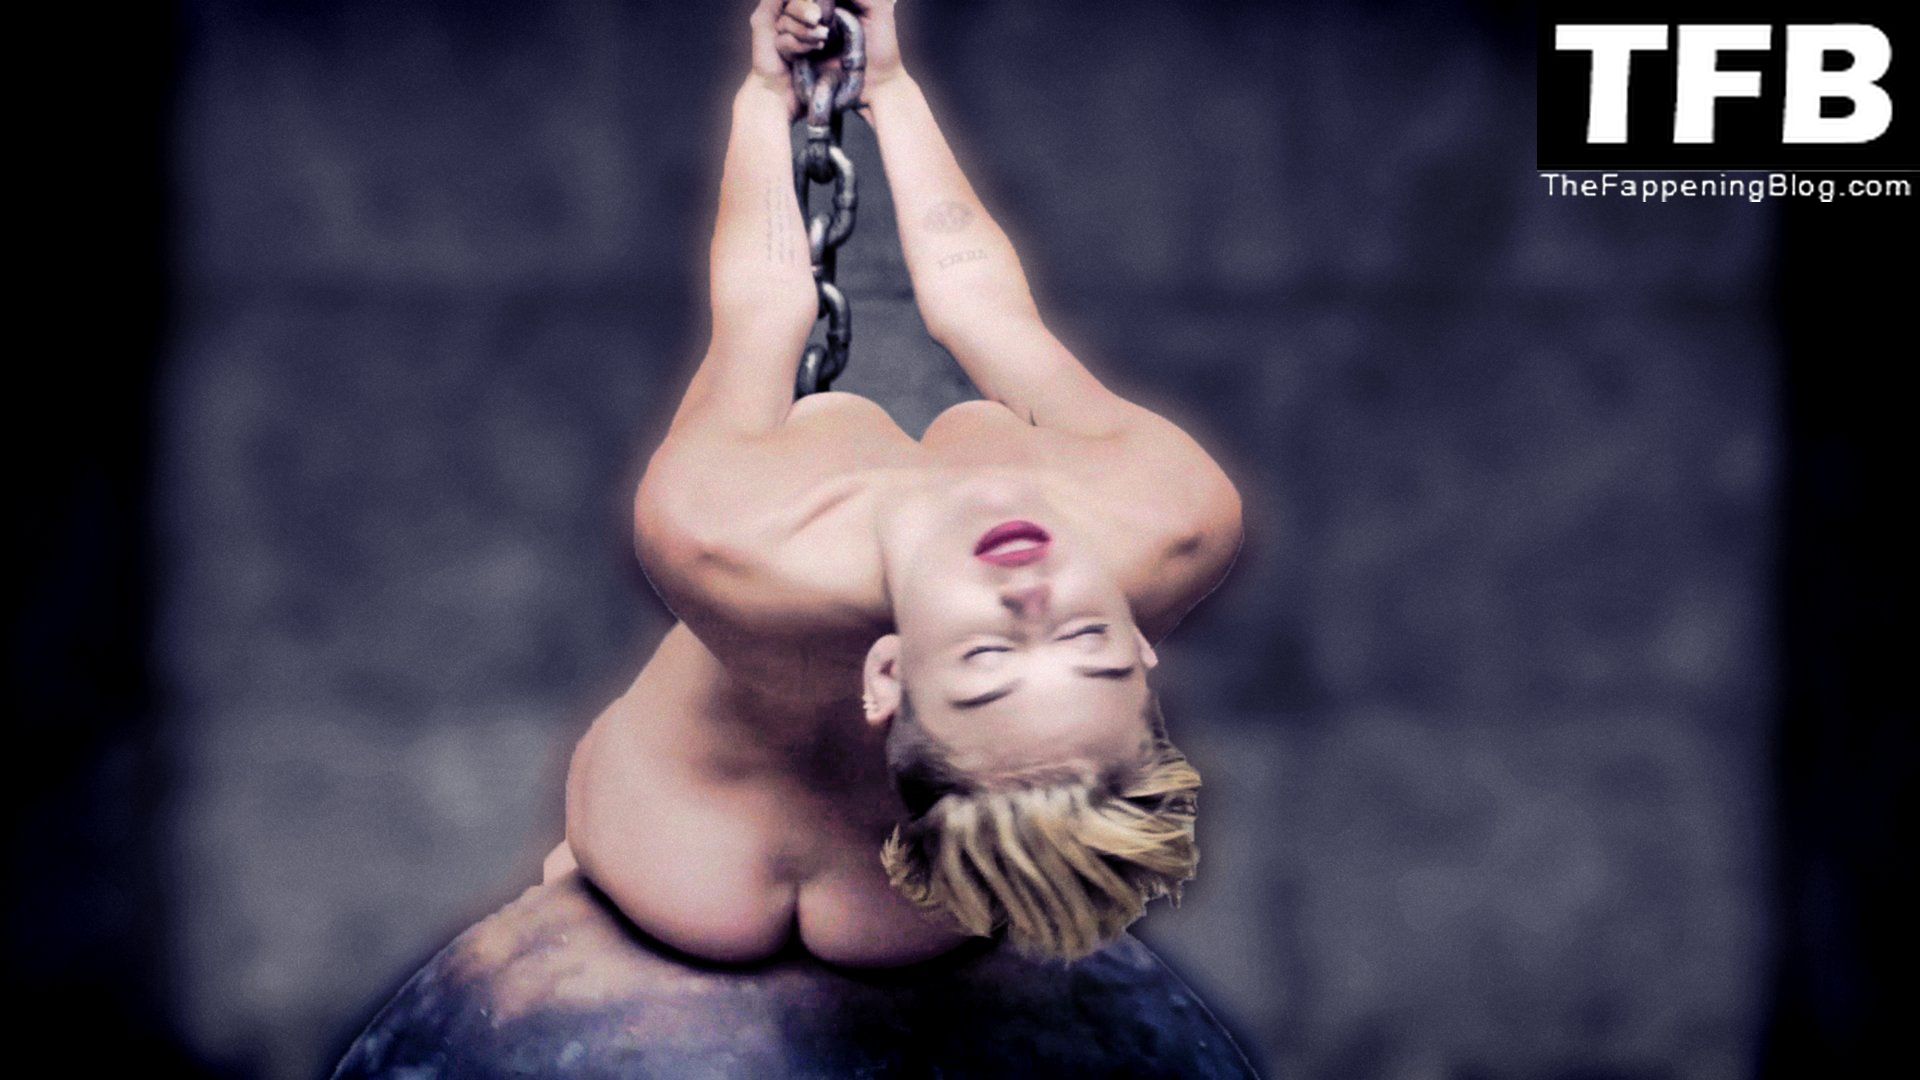 Miley-Cyrus-Nude-Wrecking-Ball-The-Fappening-Blog-16.jpg